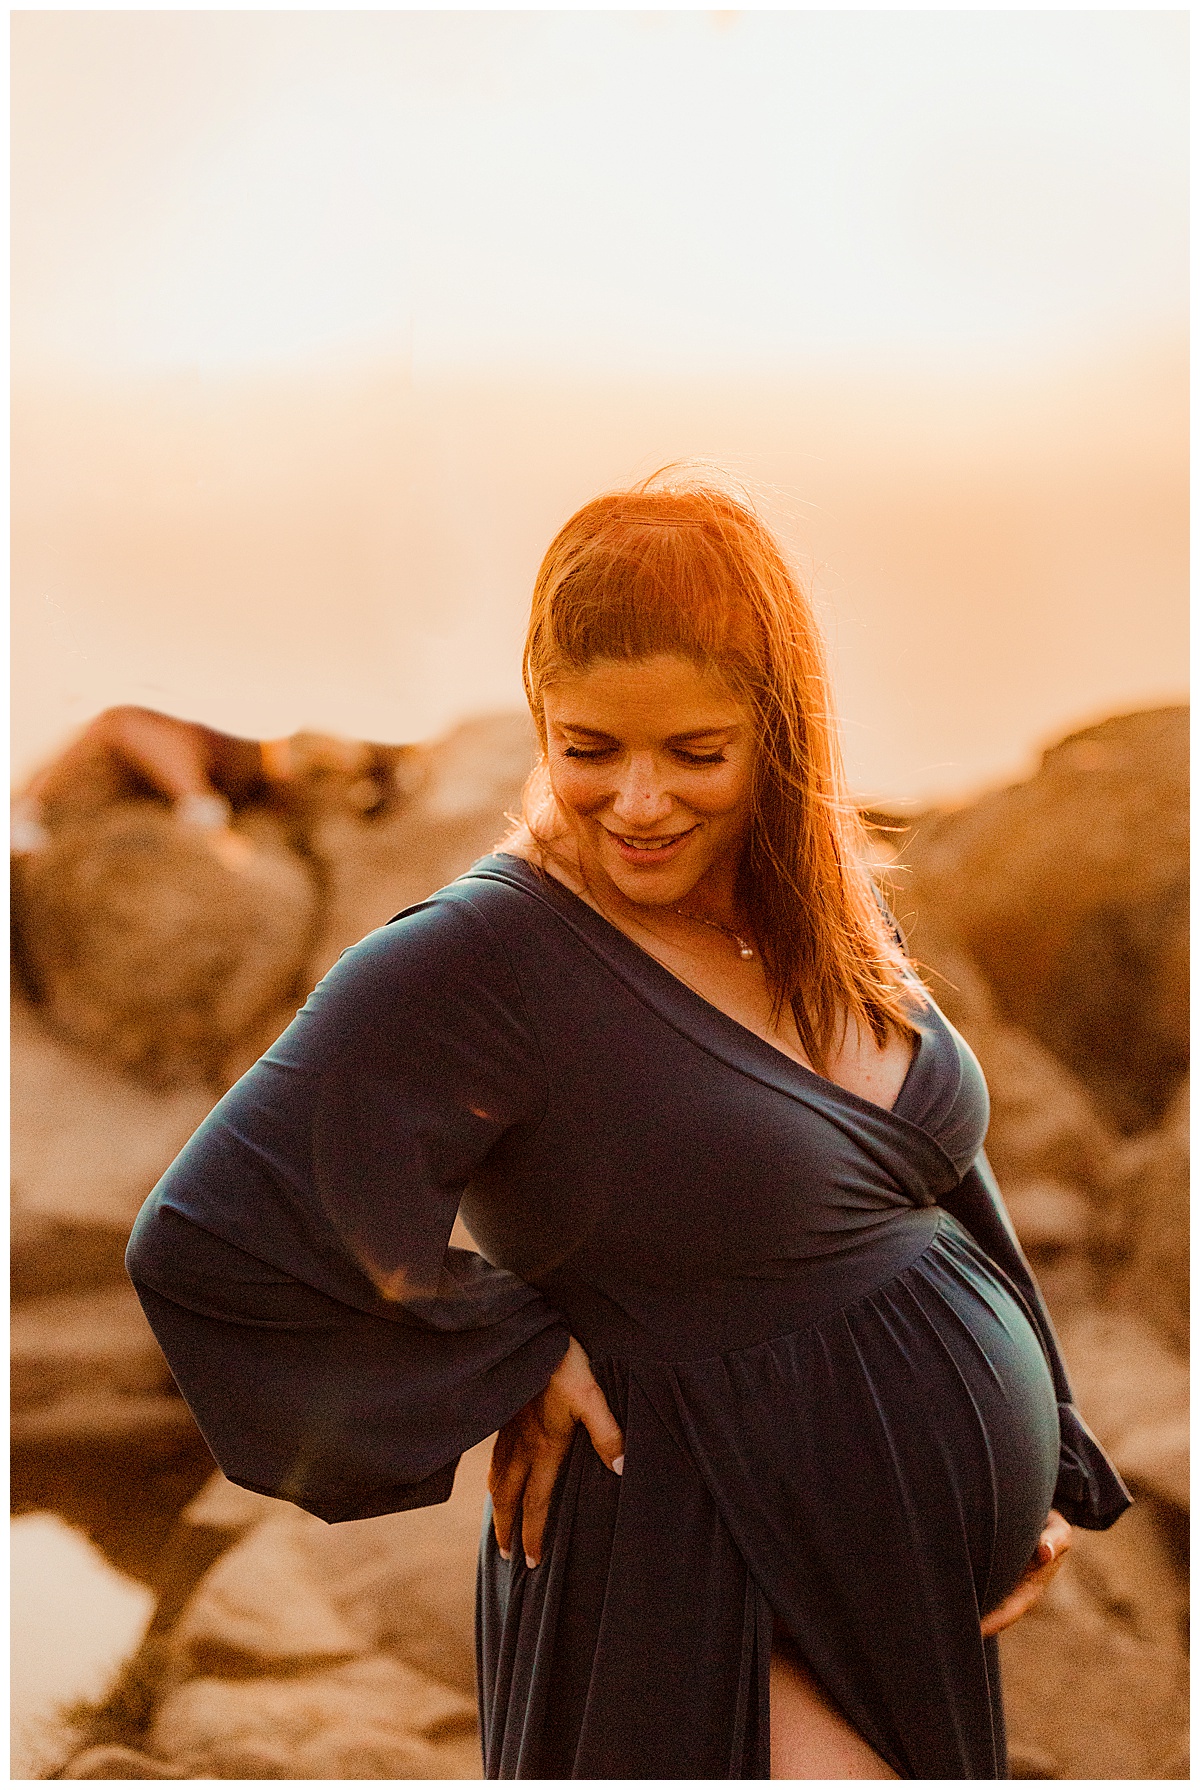 Mom smiles down at belly during sunset for Washington DC Maternity Photographer 